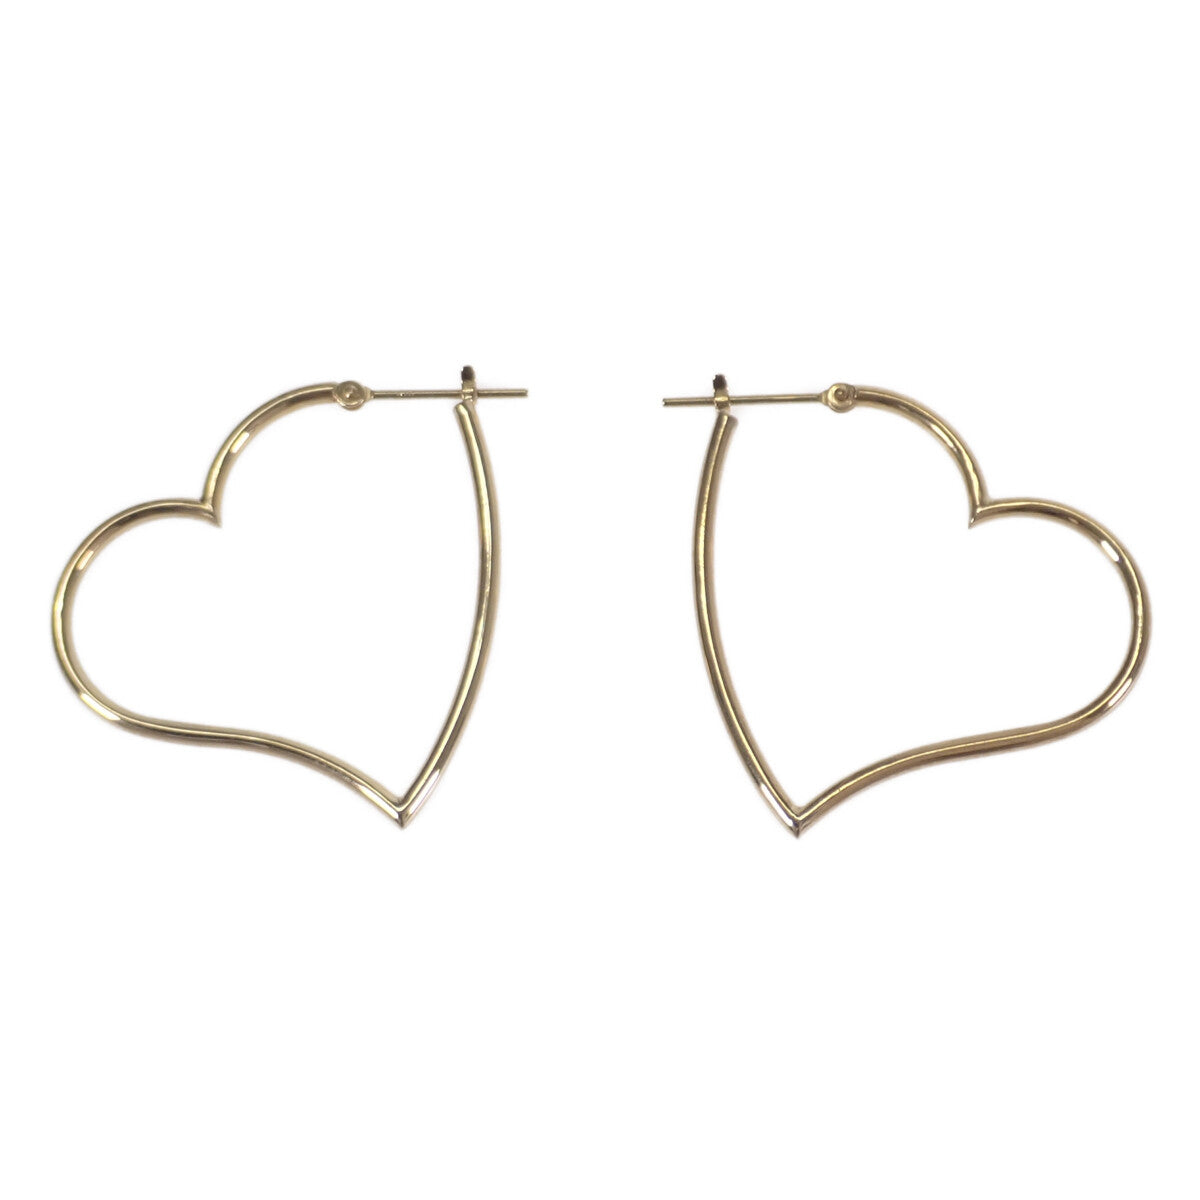 LuxUness  K18 Yellow Gold Heart Design Large Size Earrings for Women - Unused Preloved in Brand new